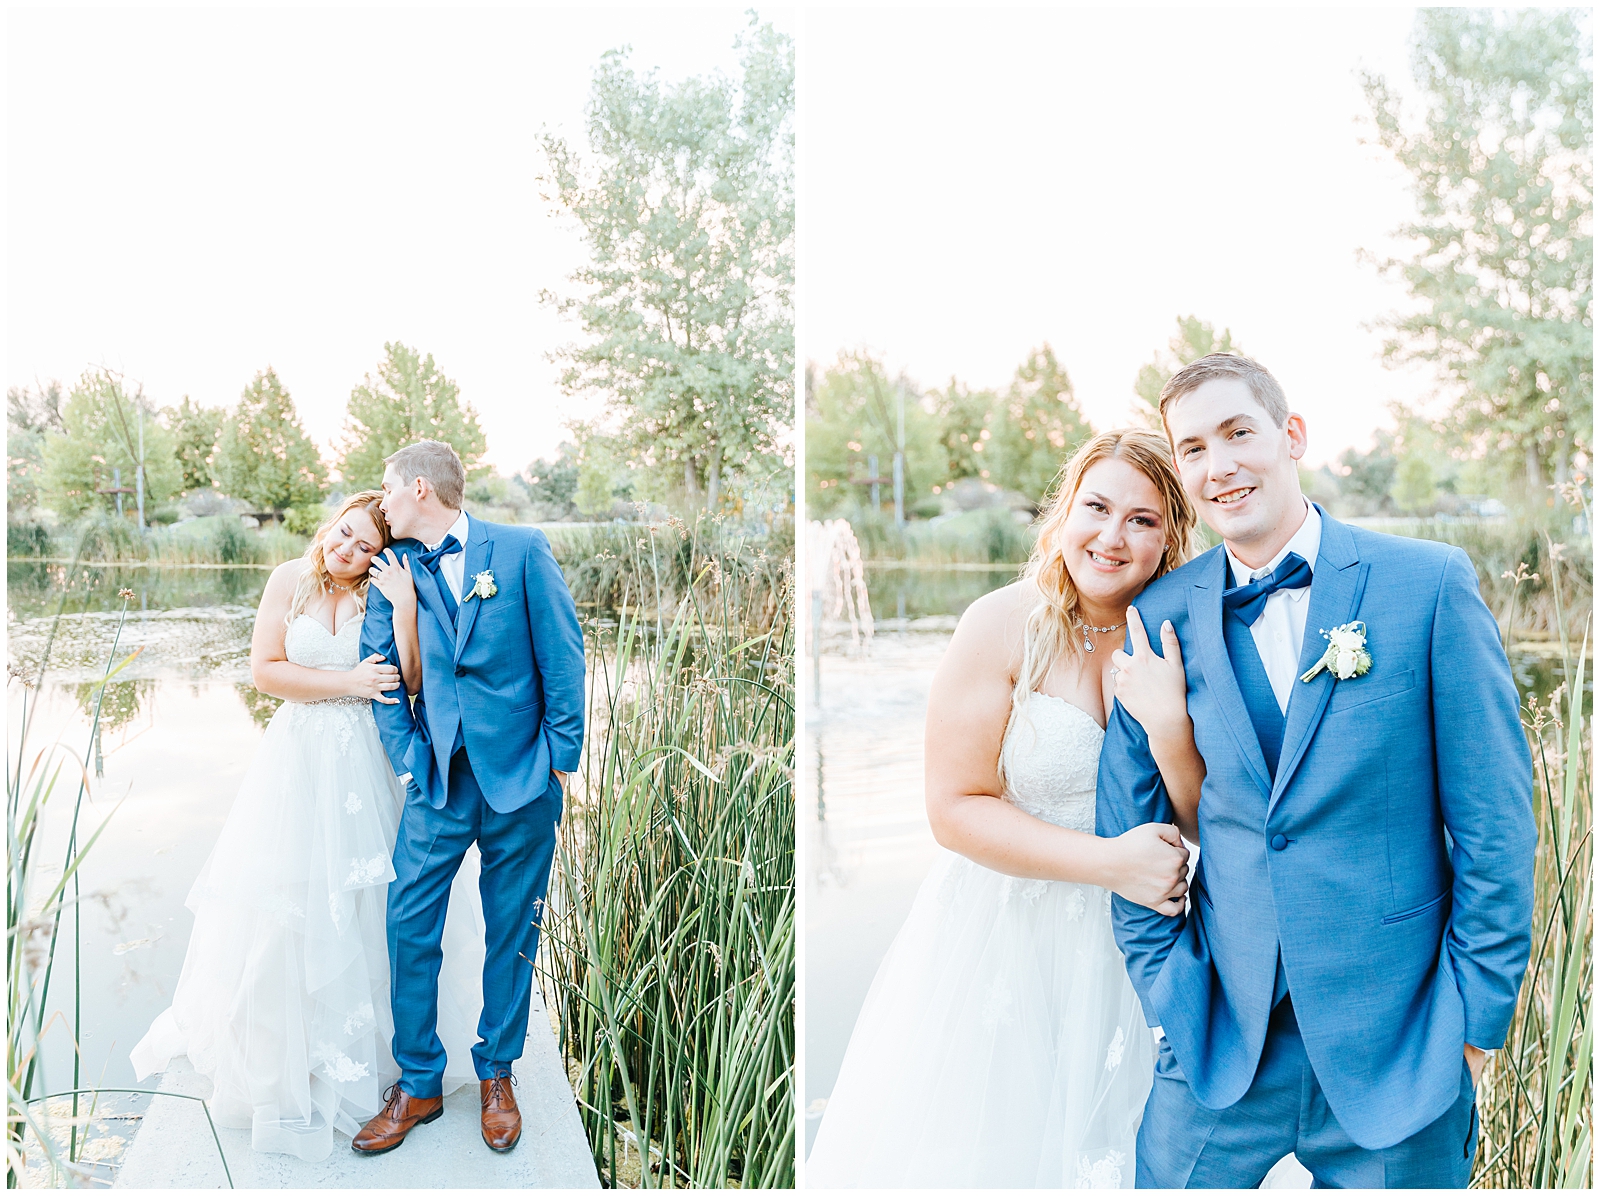 Golden hour Photos of the bride and groom at A Creekside Affair Wedding